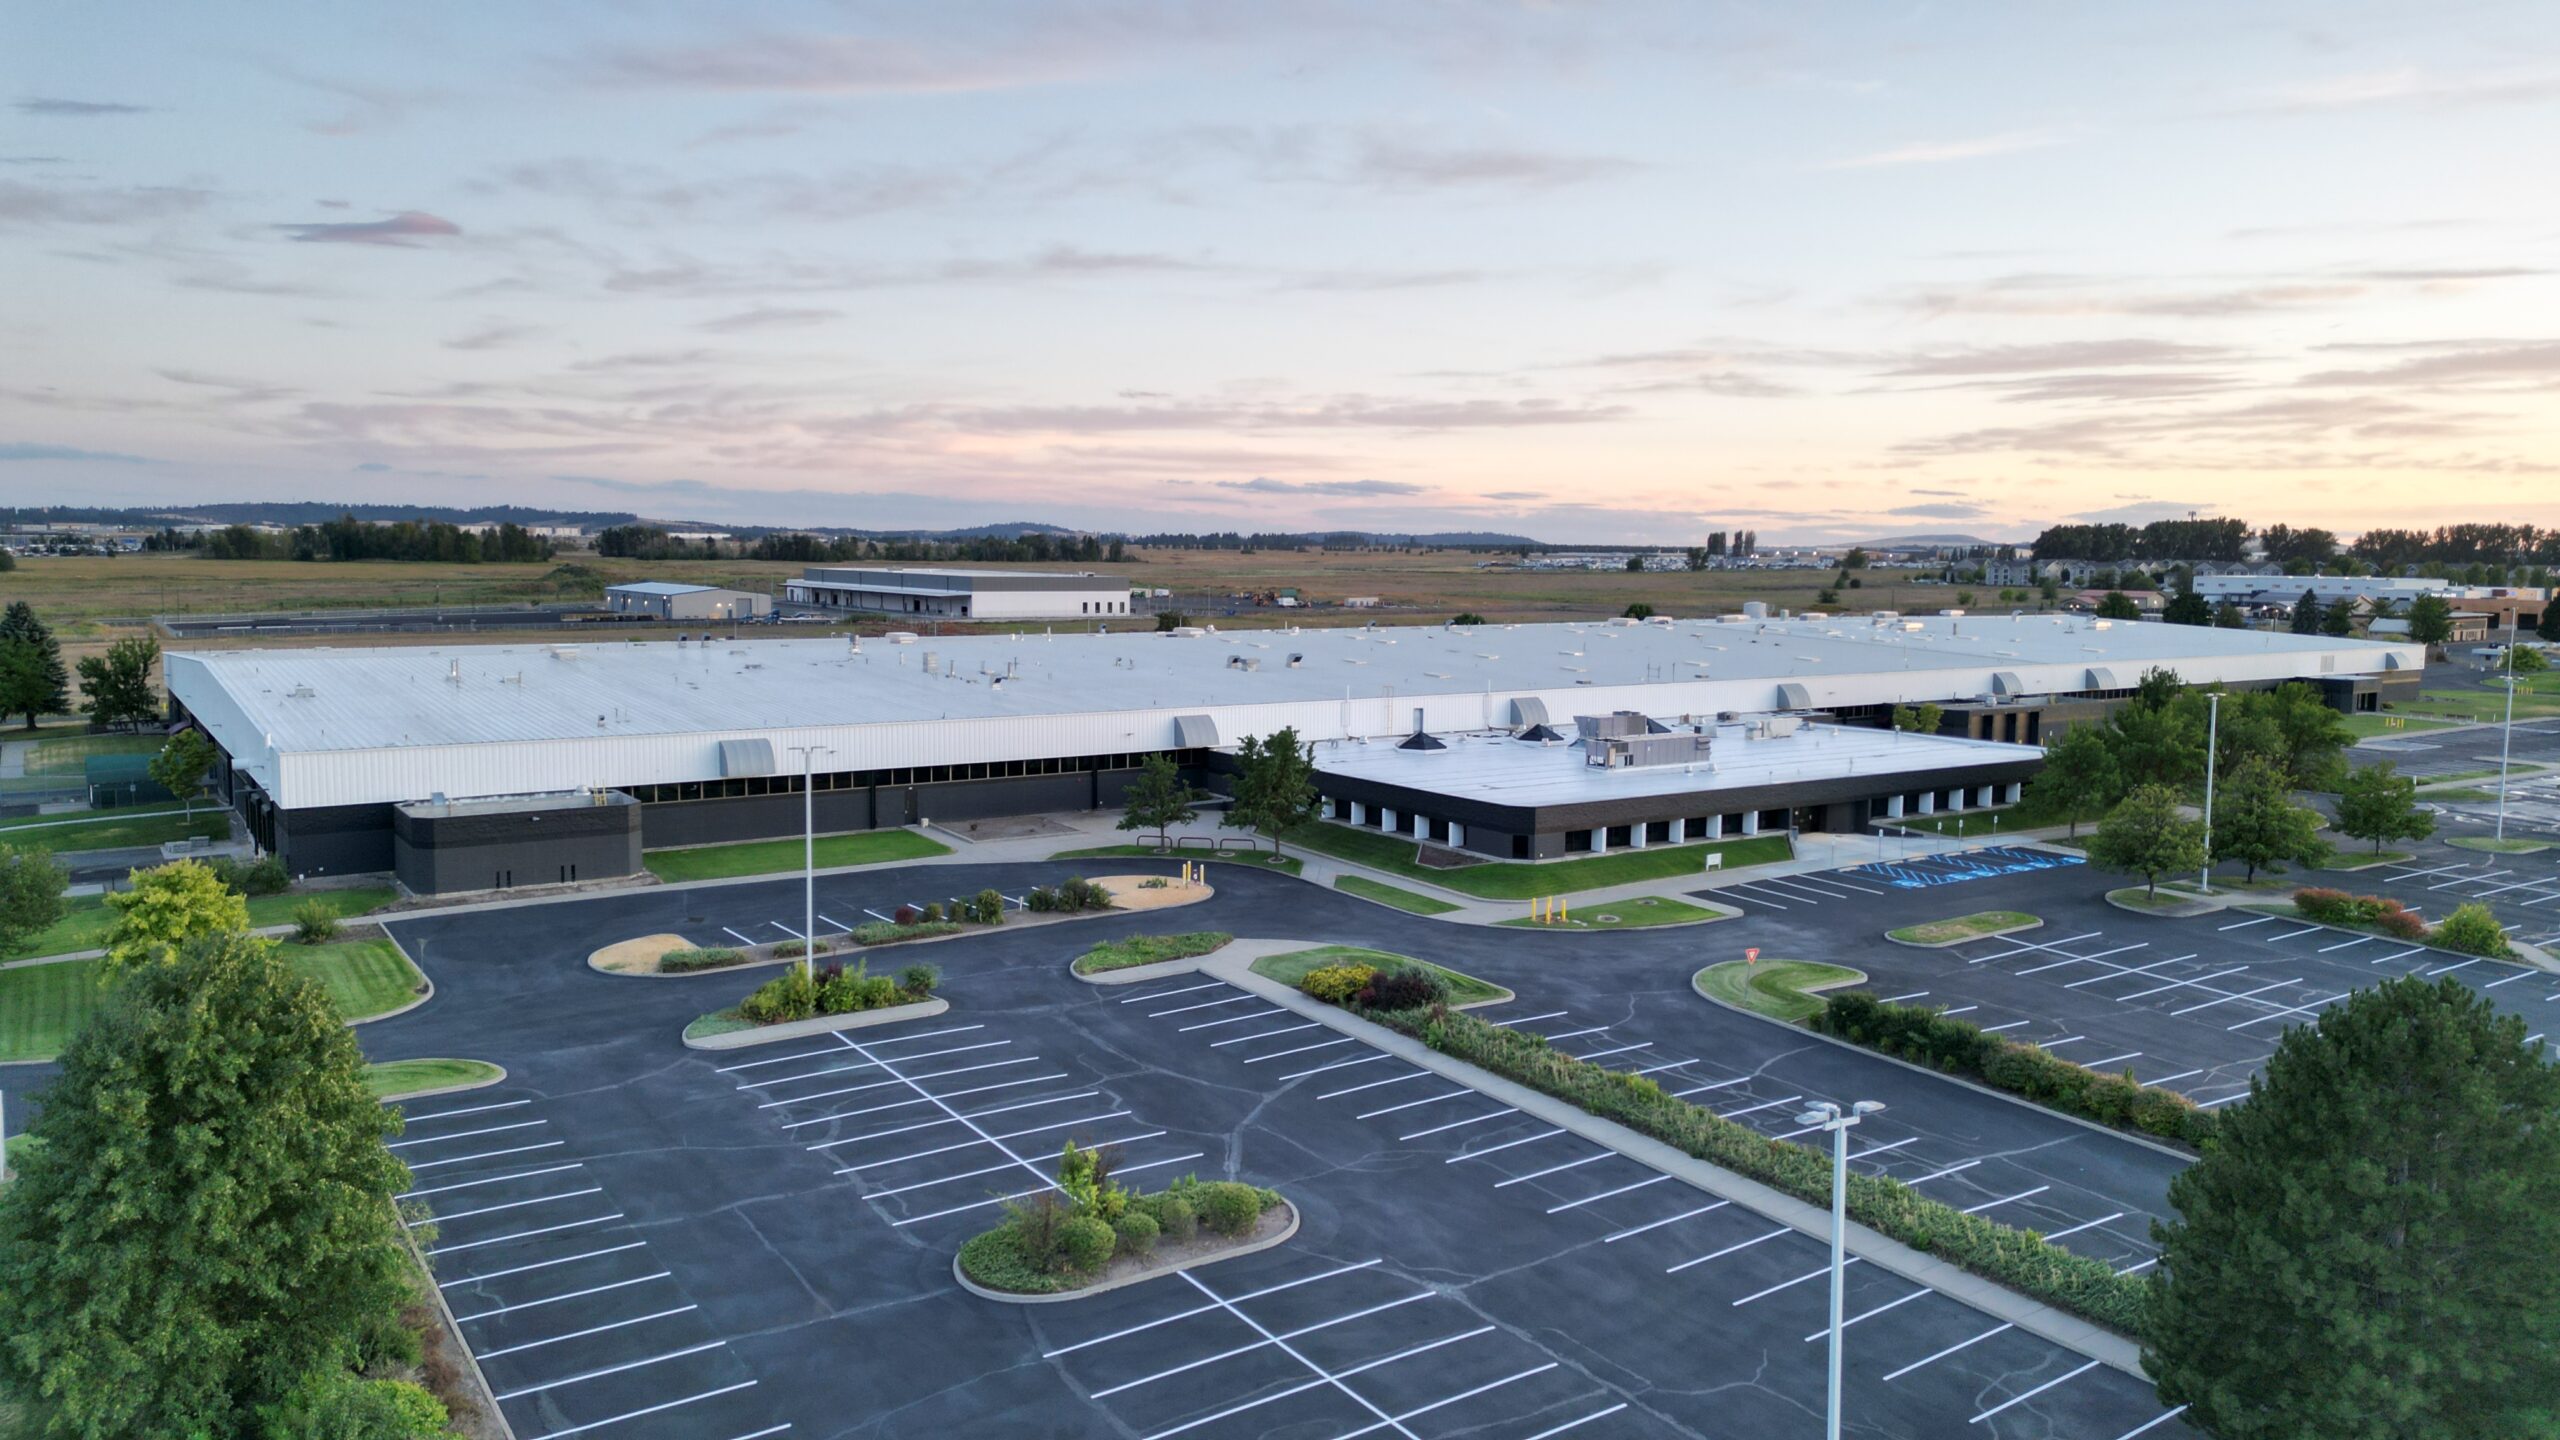 The proposed site of the American Aerospace Materials Manufacturing Center is pictured: a large warehouse at sunset with a parking lot and cars.